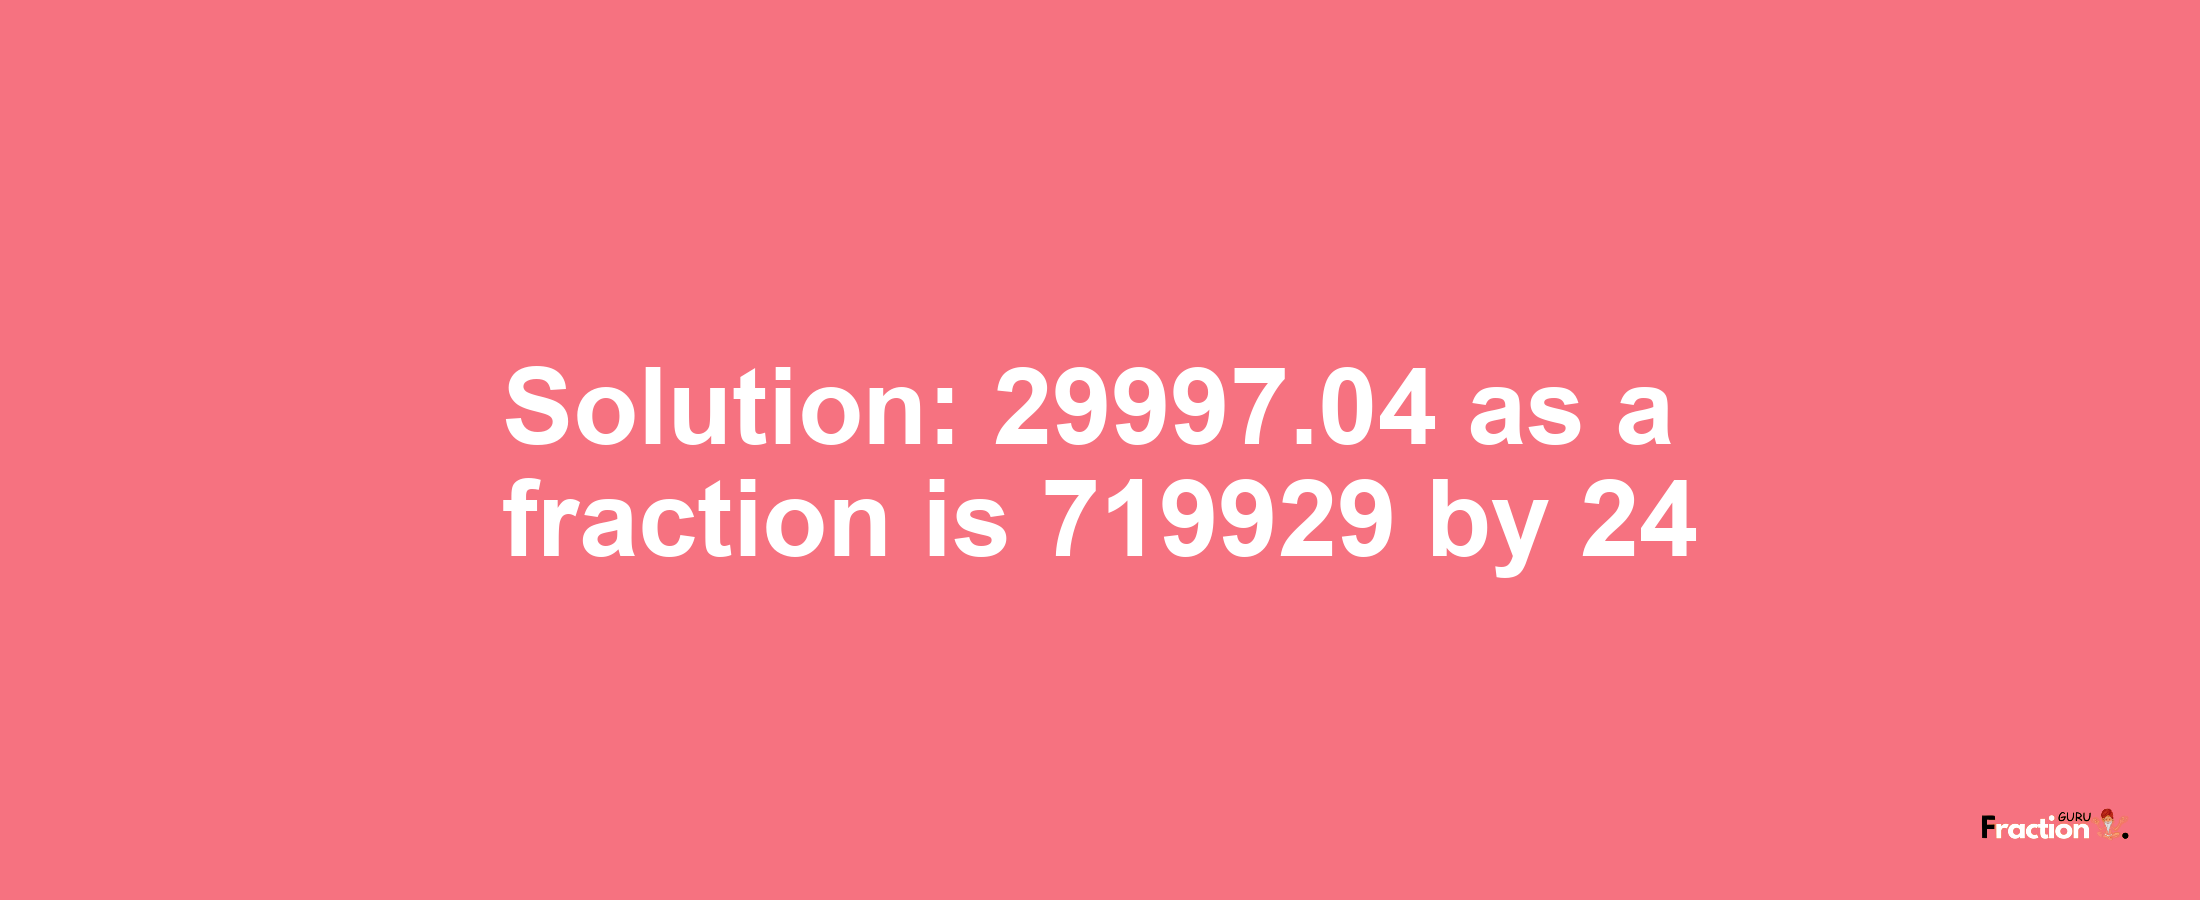 Solution:29997.04 as a fraction is 719929/24